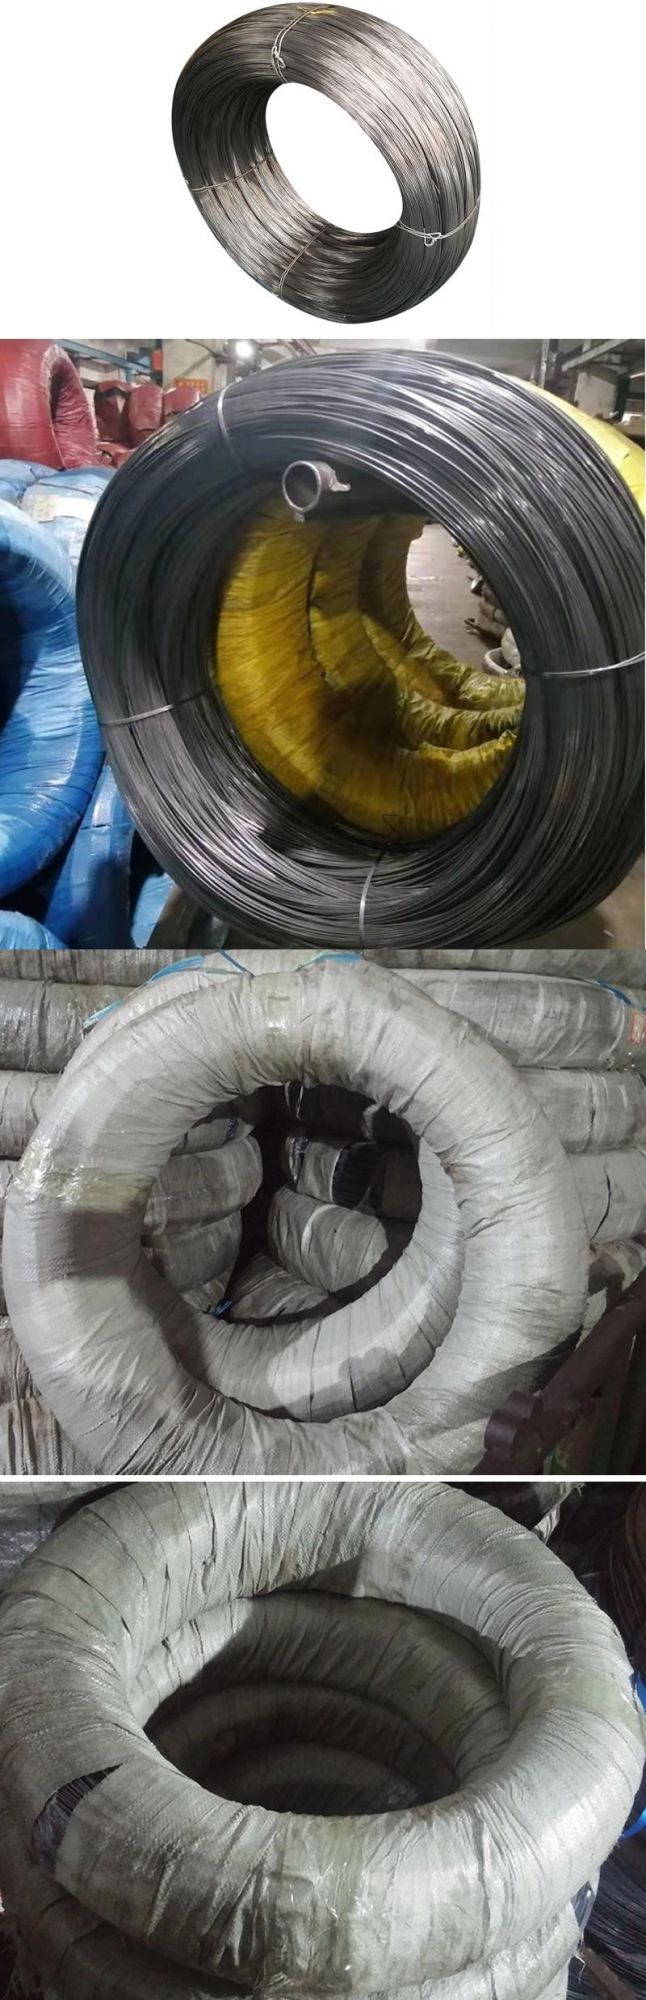 Hot Sale 1.9-2.4mm Steel Wire for Spring Mattress